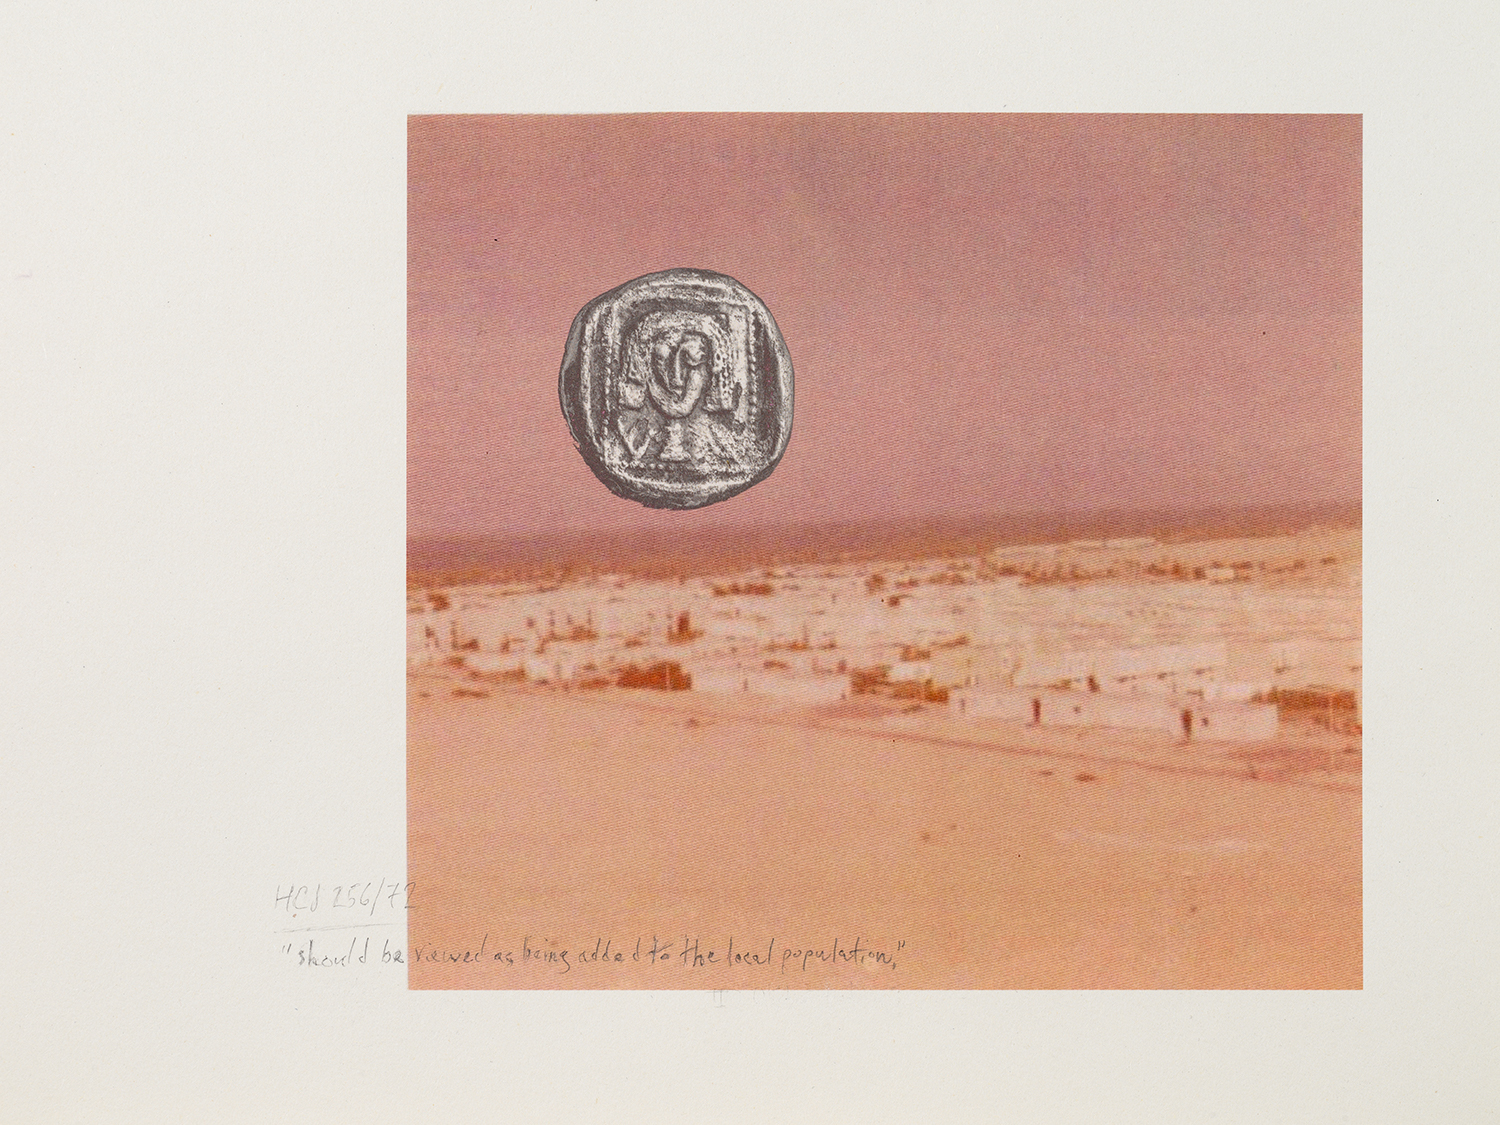 photo of pigment inkjet print consisting of ancient coin, settlement archive, and writing referencing Israeli law HCJ 256-72